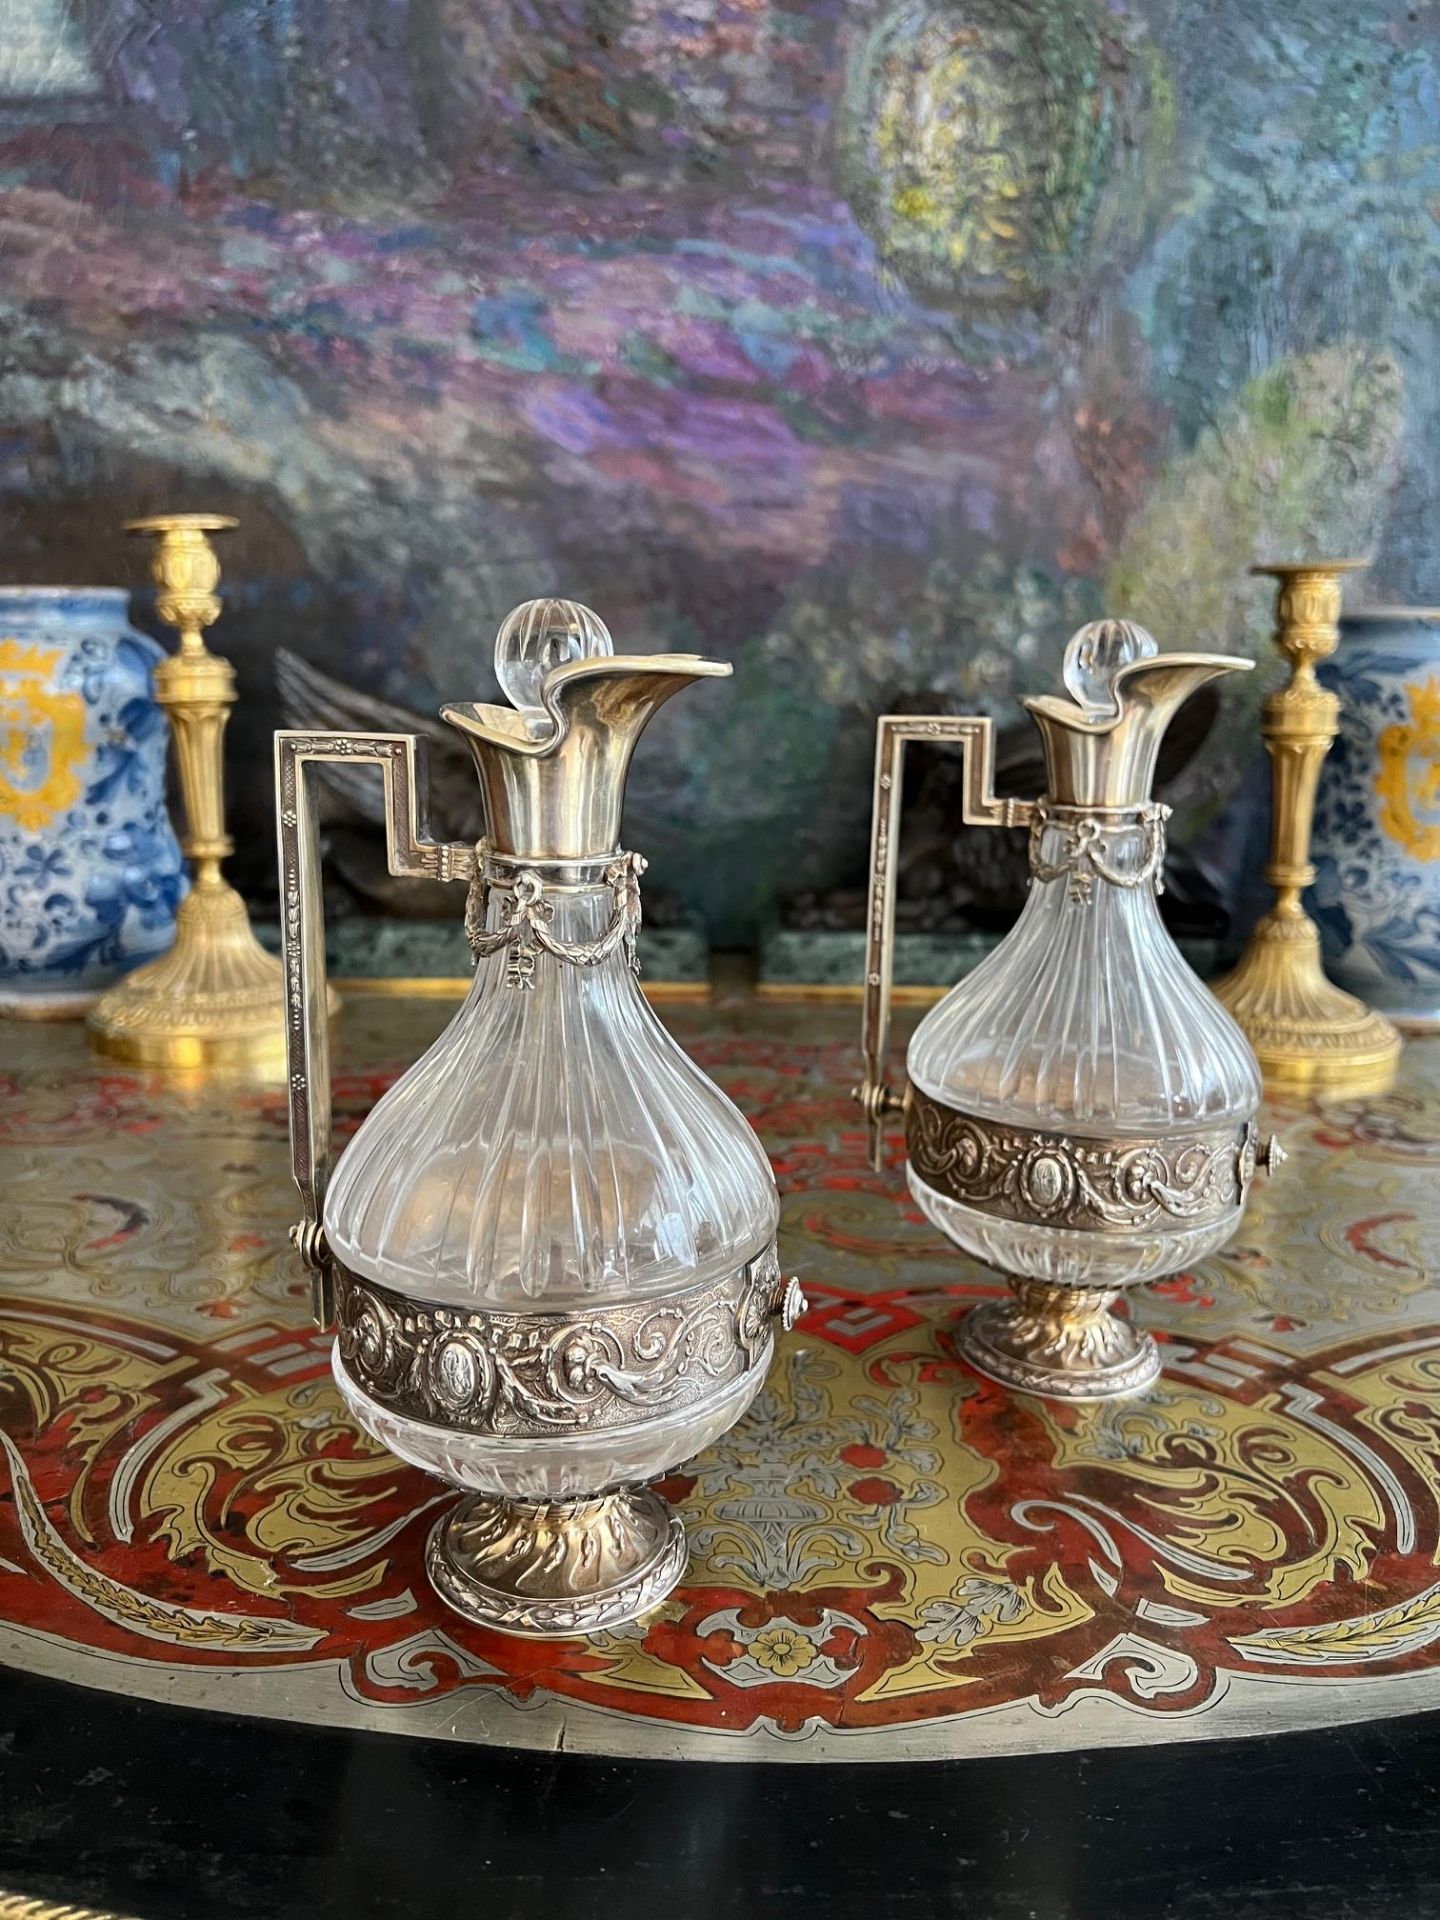 A PAIR OF 19TH CENTURY FRENCH SILVER AND GLASS LIQUOR JUGS - Image 3 of 7